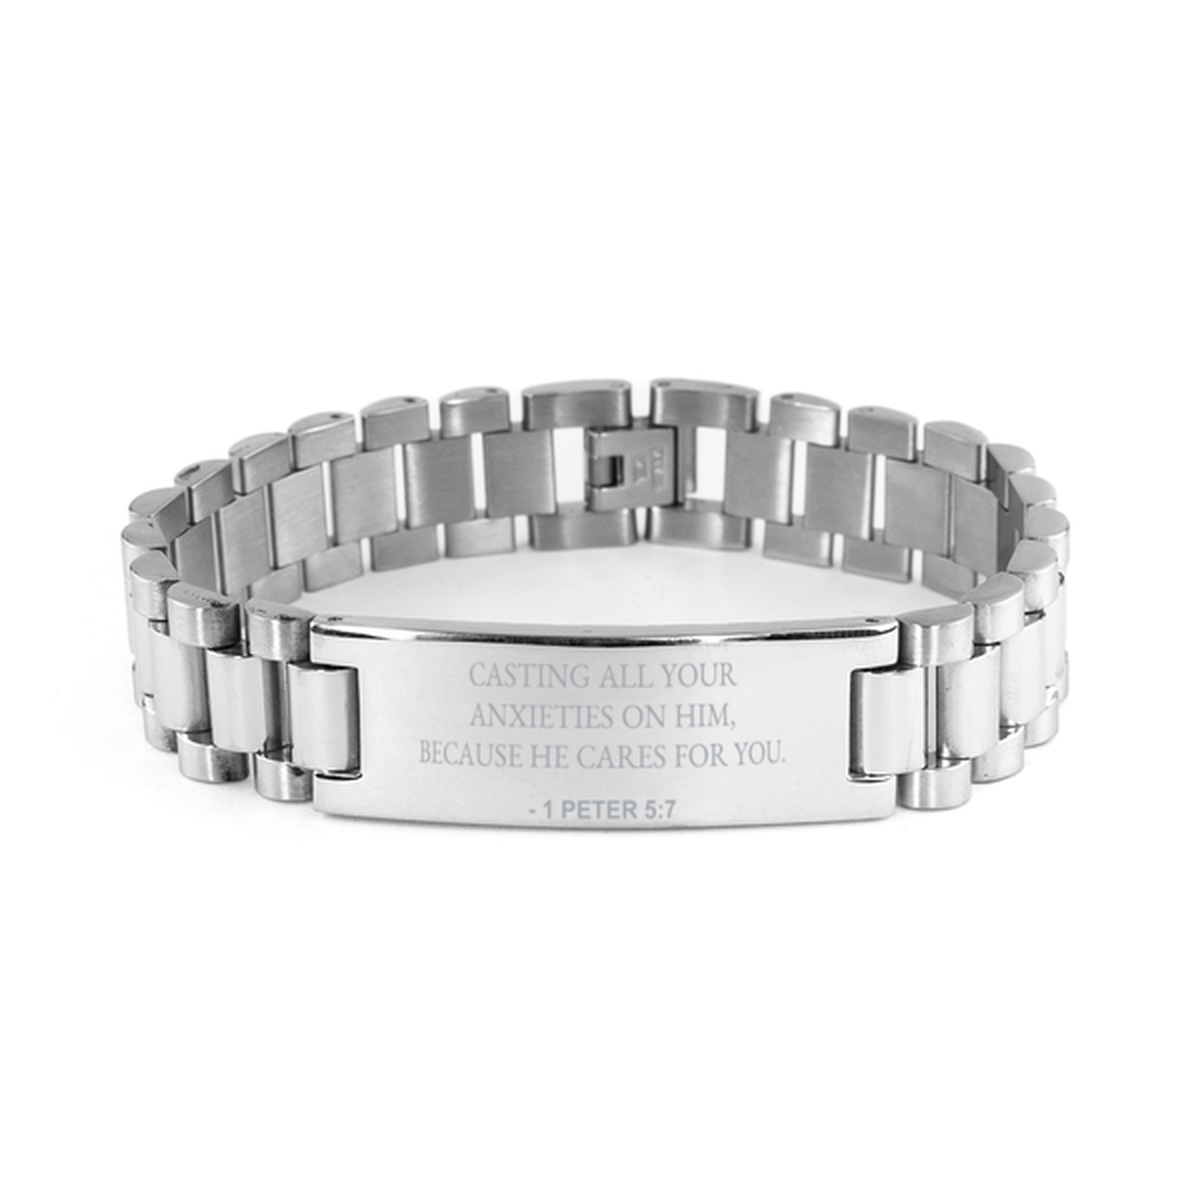 Christian Ladder Stainless Steel Bracelet, 1 Peter 5:7 Casting All Your Anxieties On Him, Because He, Motivational Bible Verse Gifts For Men Women